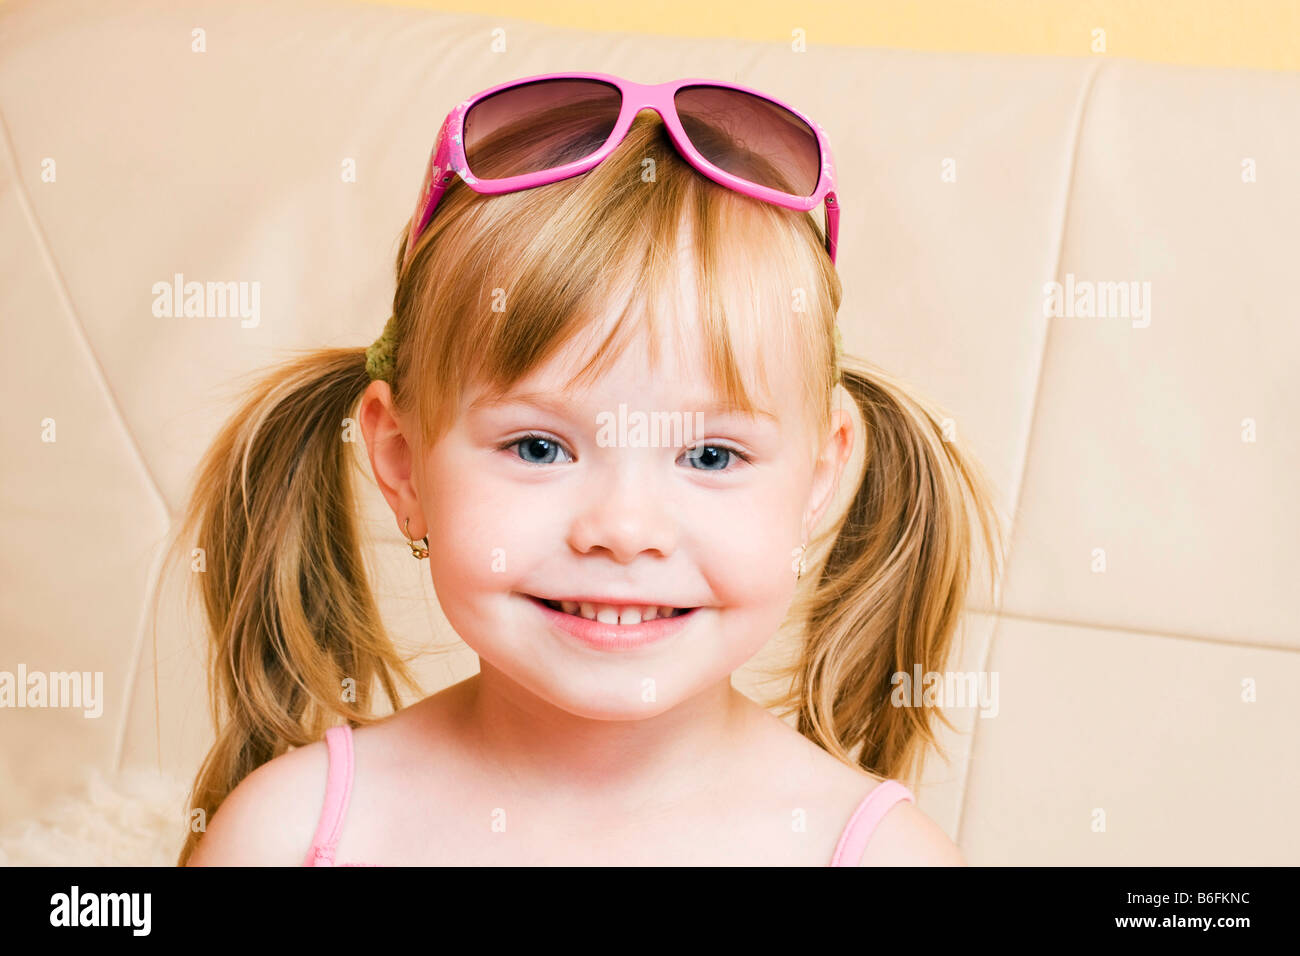 Smiling blond little girl, 4 years, with sunglasses Stock Photo